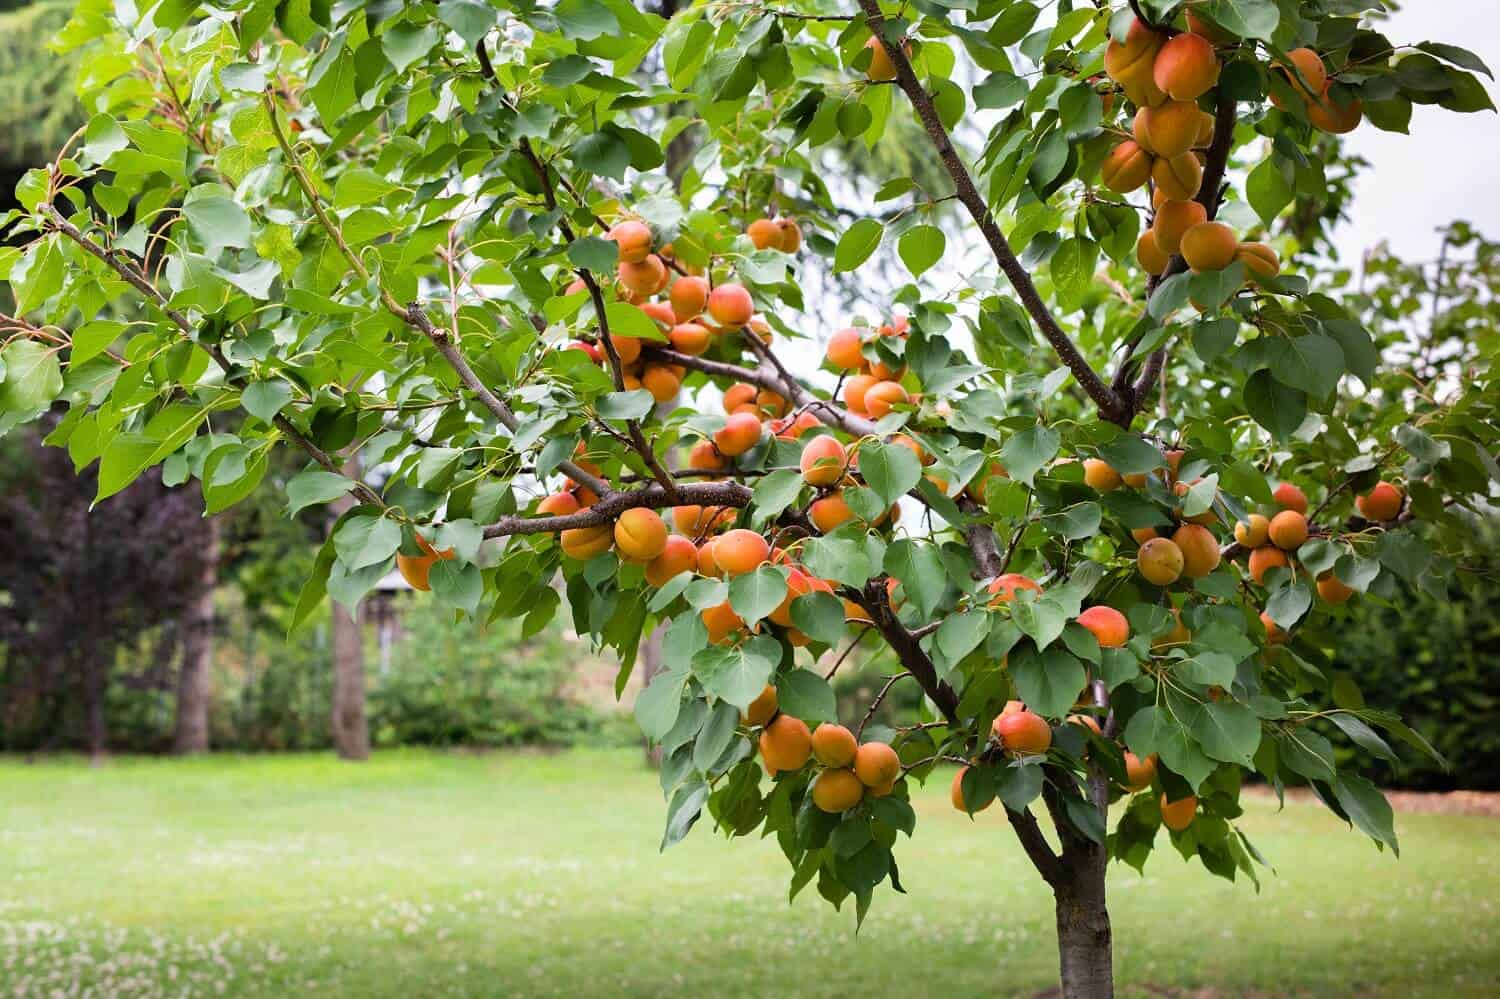 Fastest Growing Fruit Trees - A tree full of Apricot fruits Featured